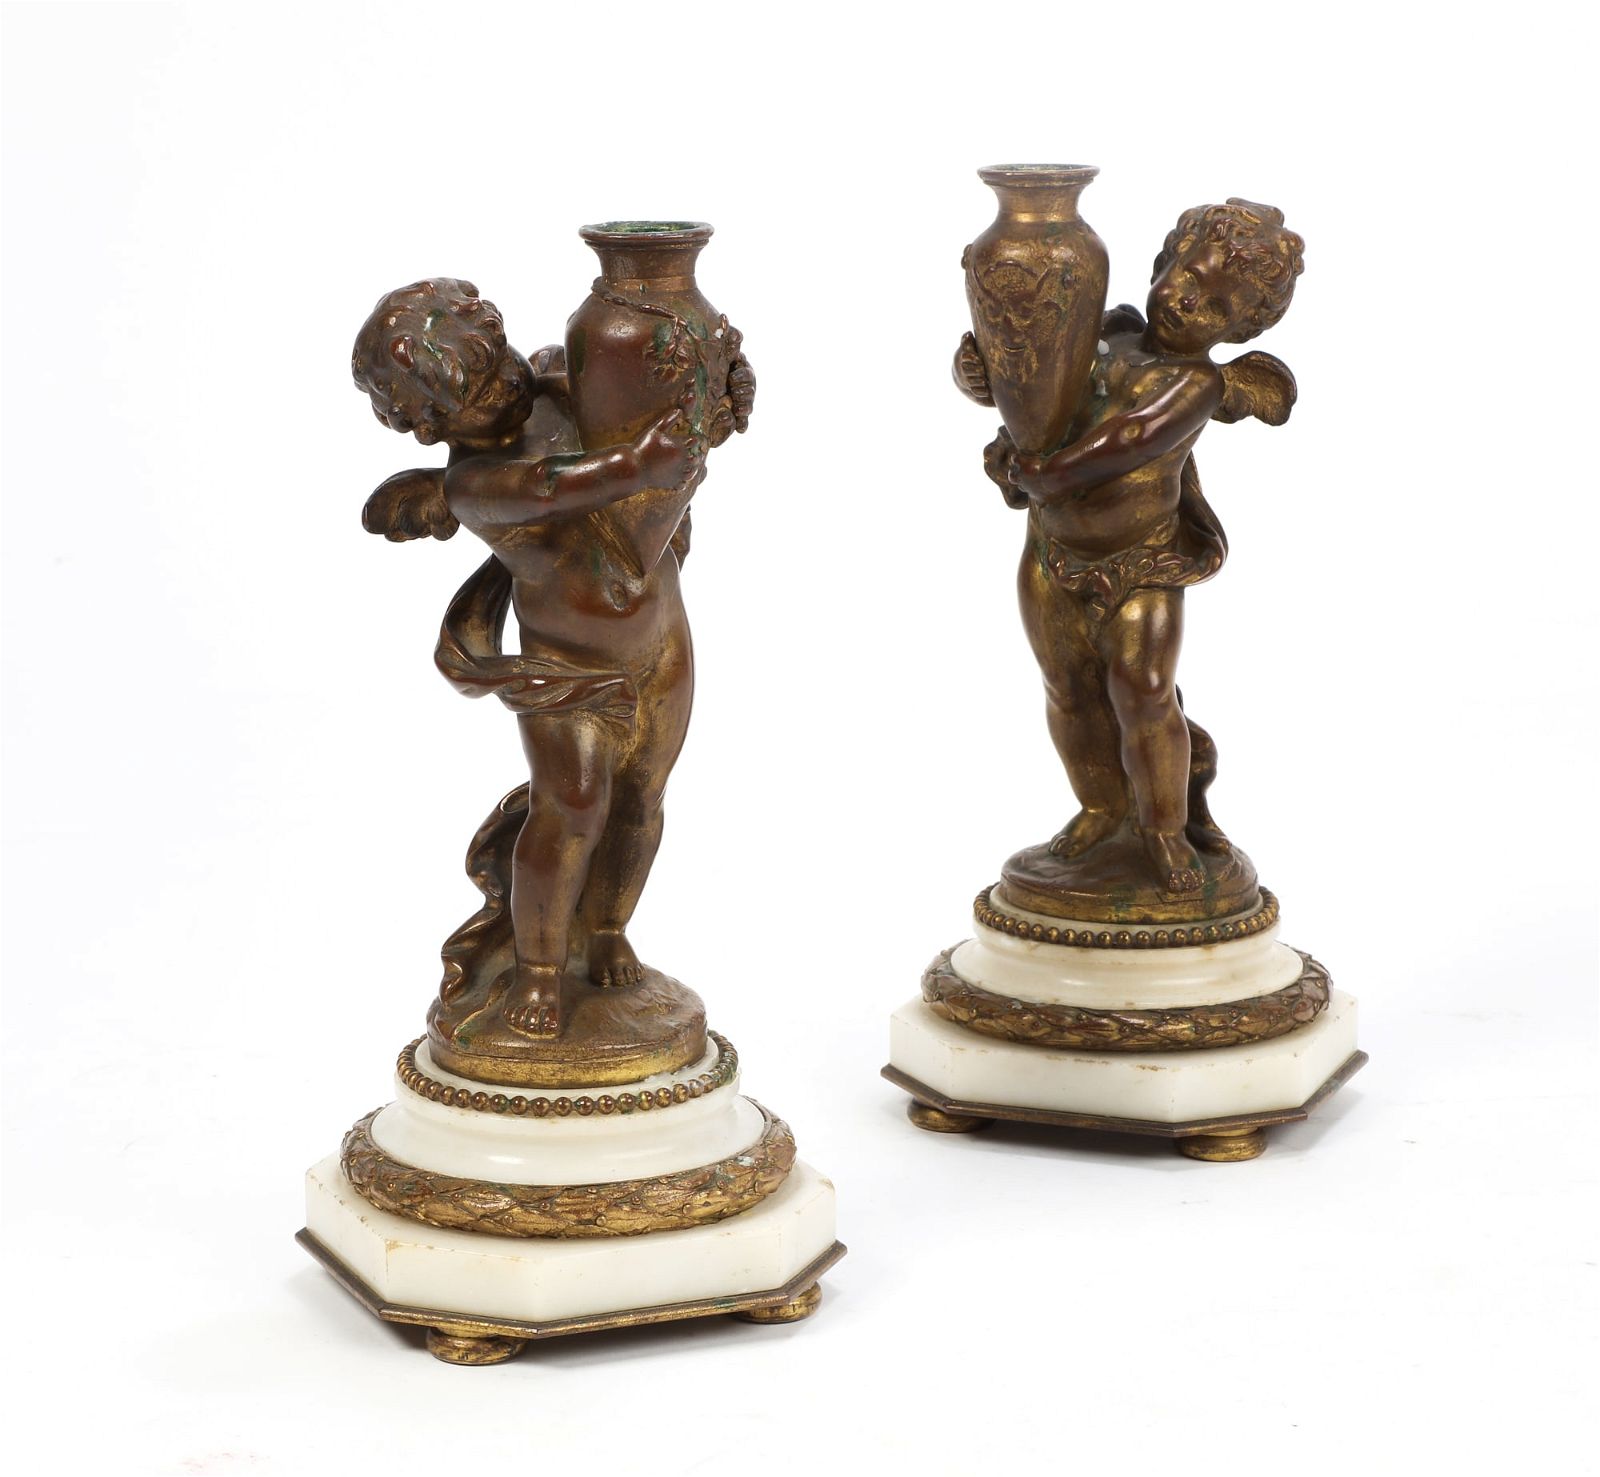 A PAIR OF FRENCH BRONZE AND MARBLECANDLESTICKSA 2fb2f4e